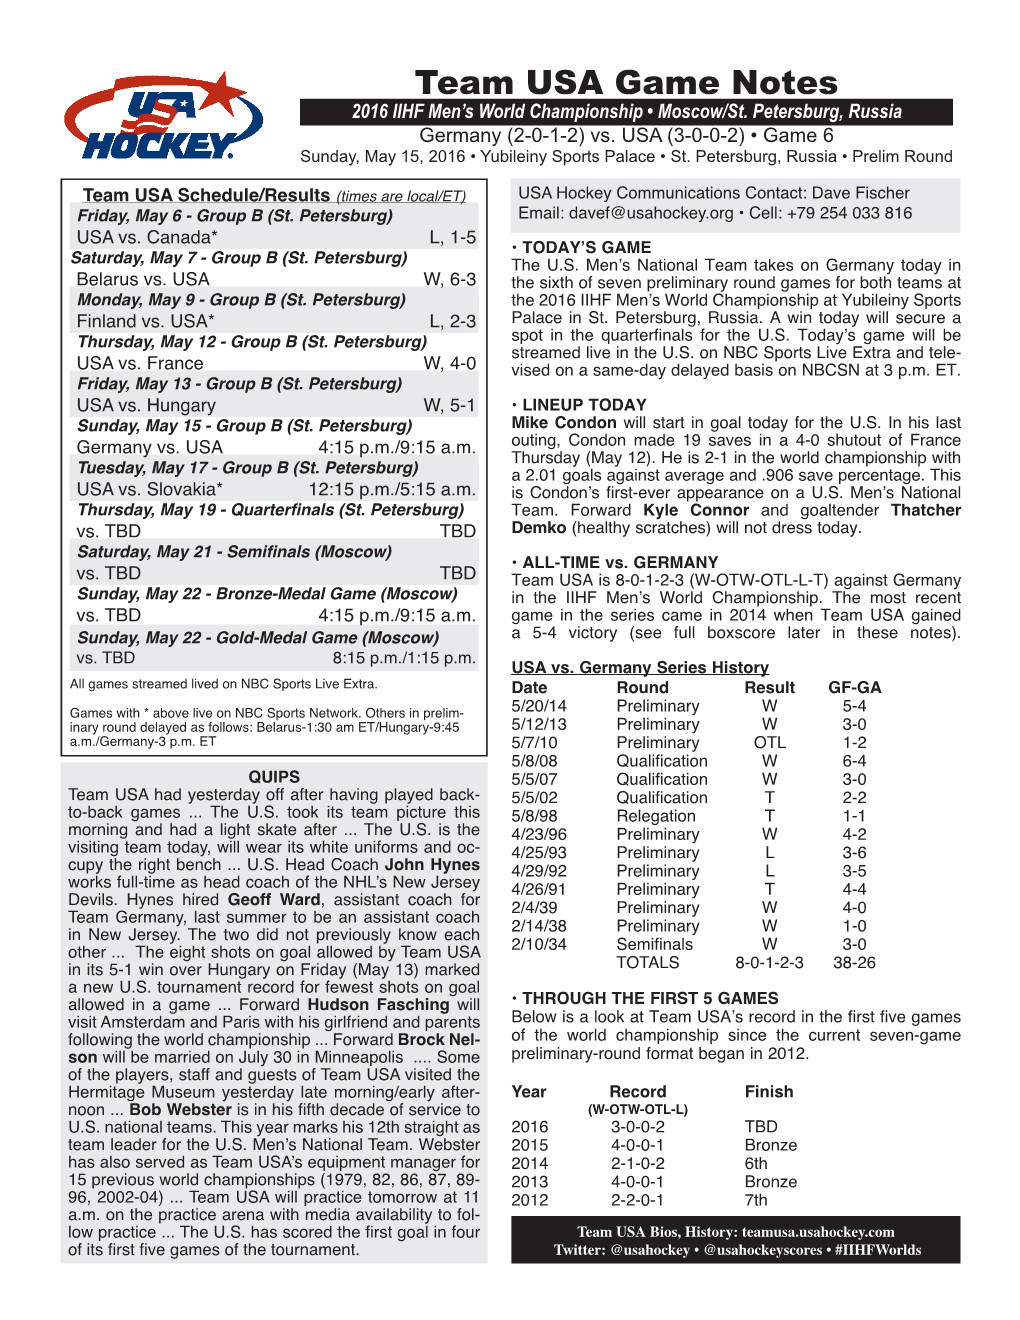 Game Notes Vs. Germany